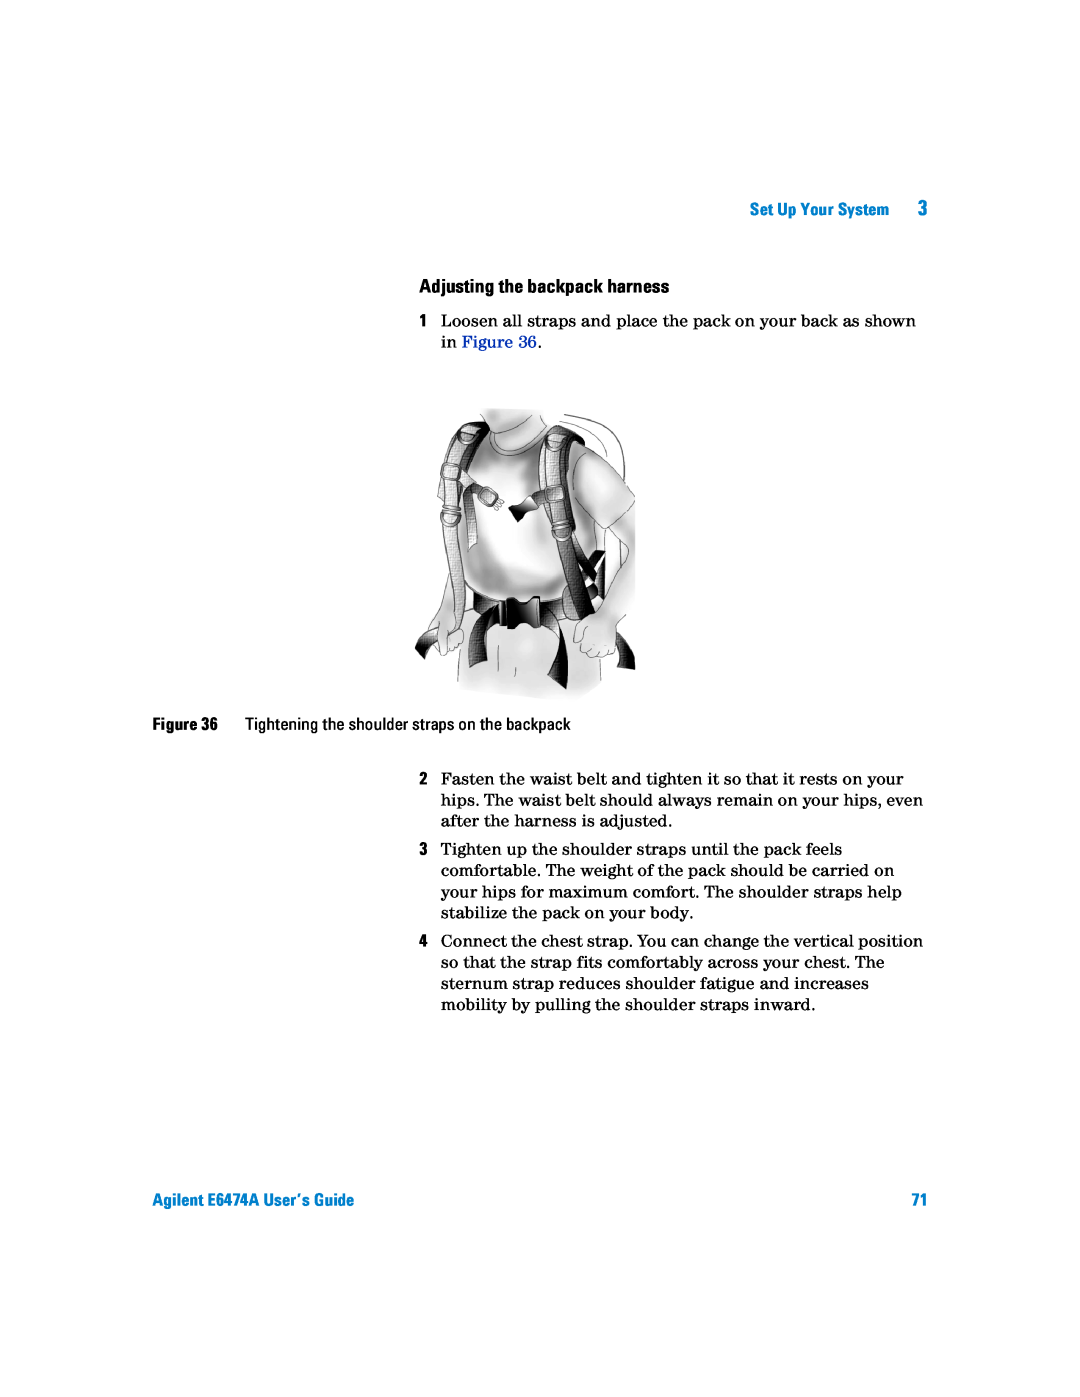 Agilent Technologies manual Adjusting the backpack harness, Set Up Your System, Agilent E6474A User’s Guide 